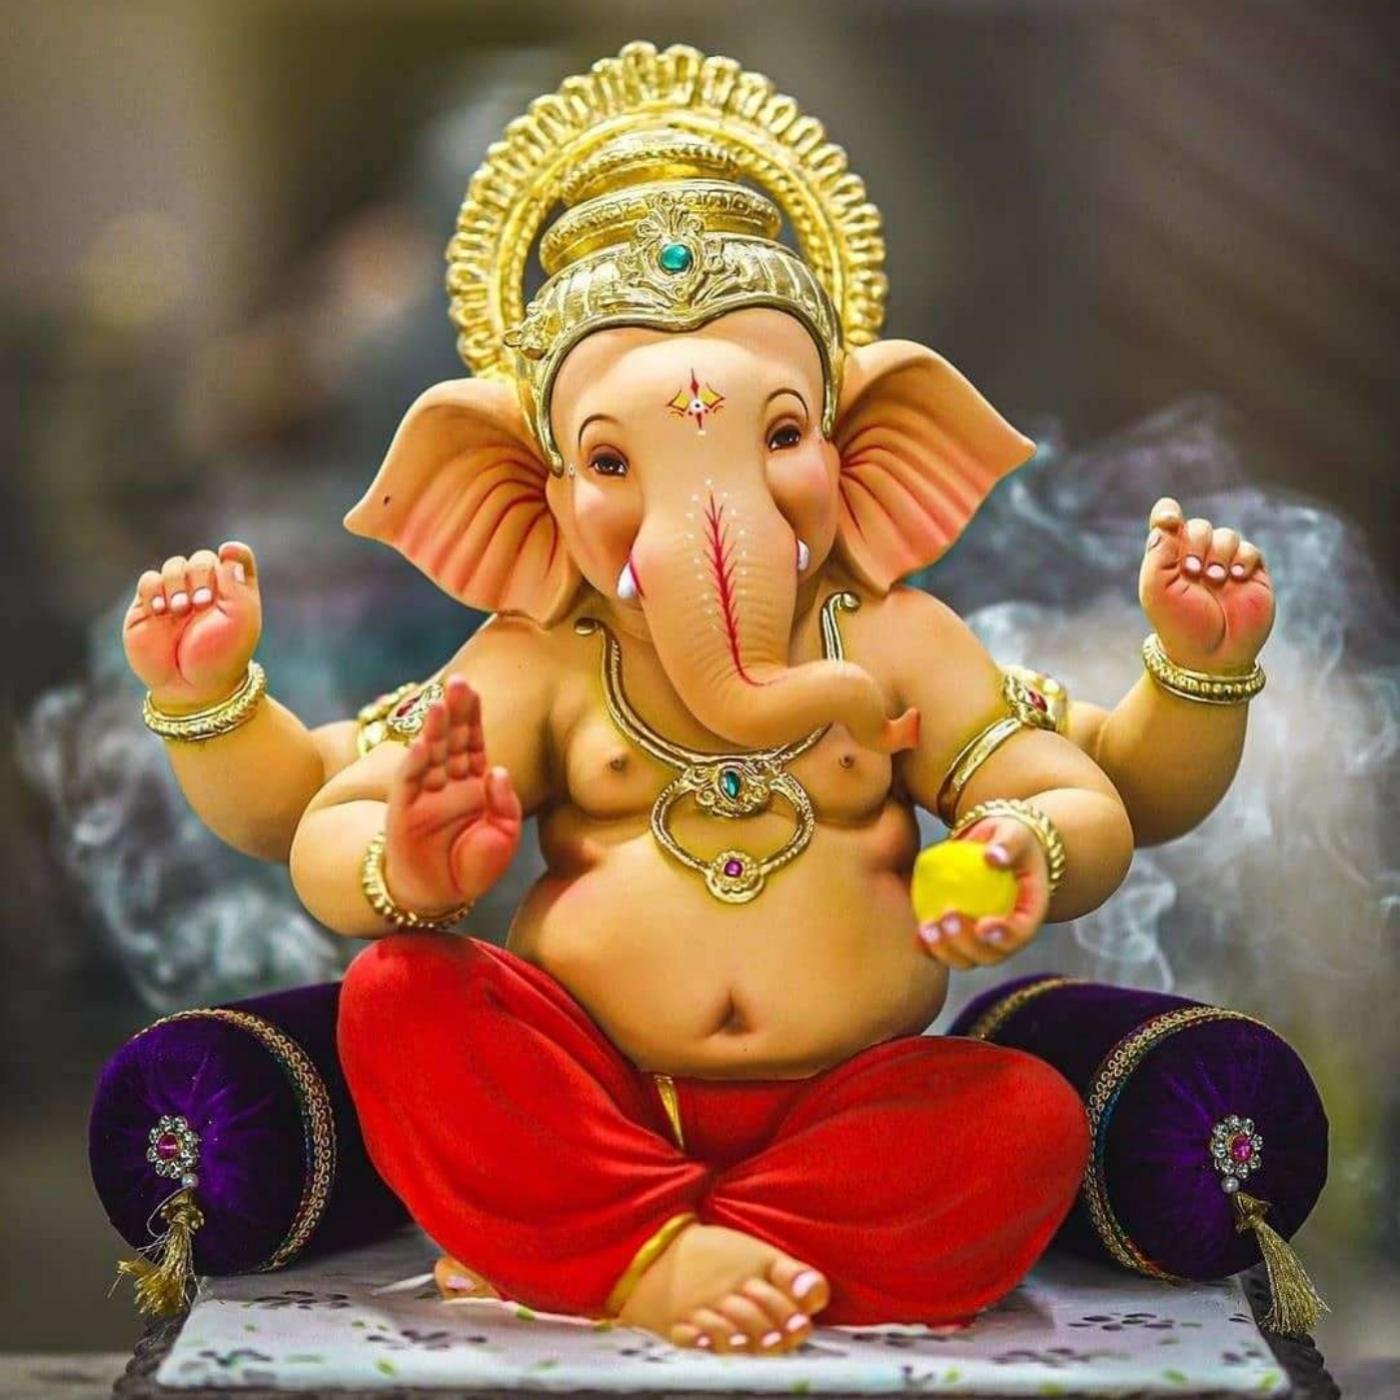 Lord Ganesha Wallpaper 1920x1080  HD Wallpapers 1080p  Lord  Ganesh  images Ganesh wallpaper Happy ganesh chaturthi images